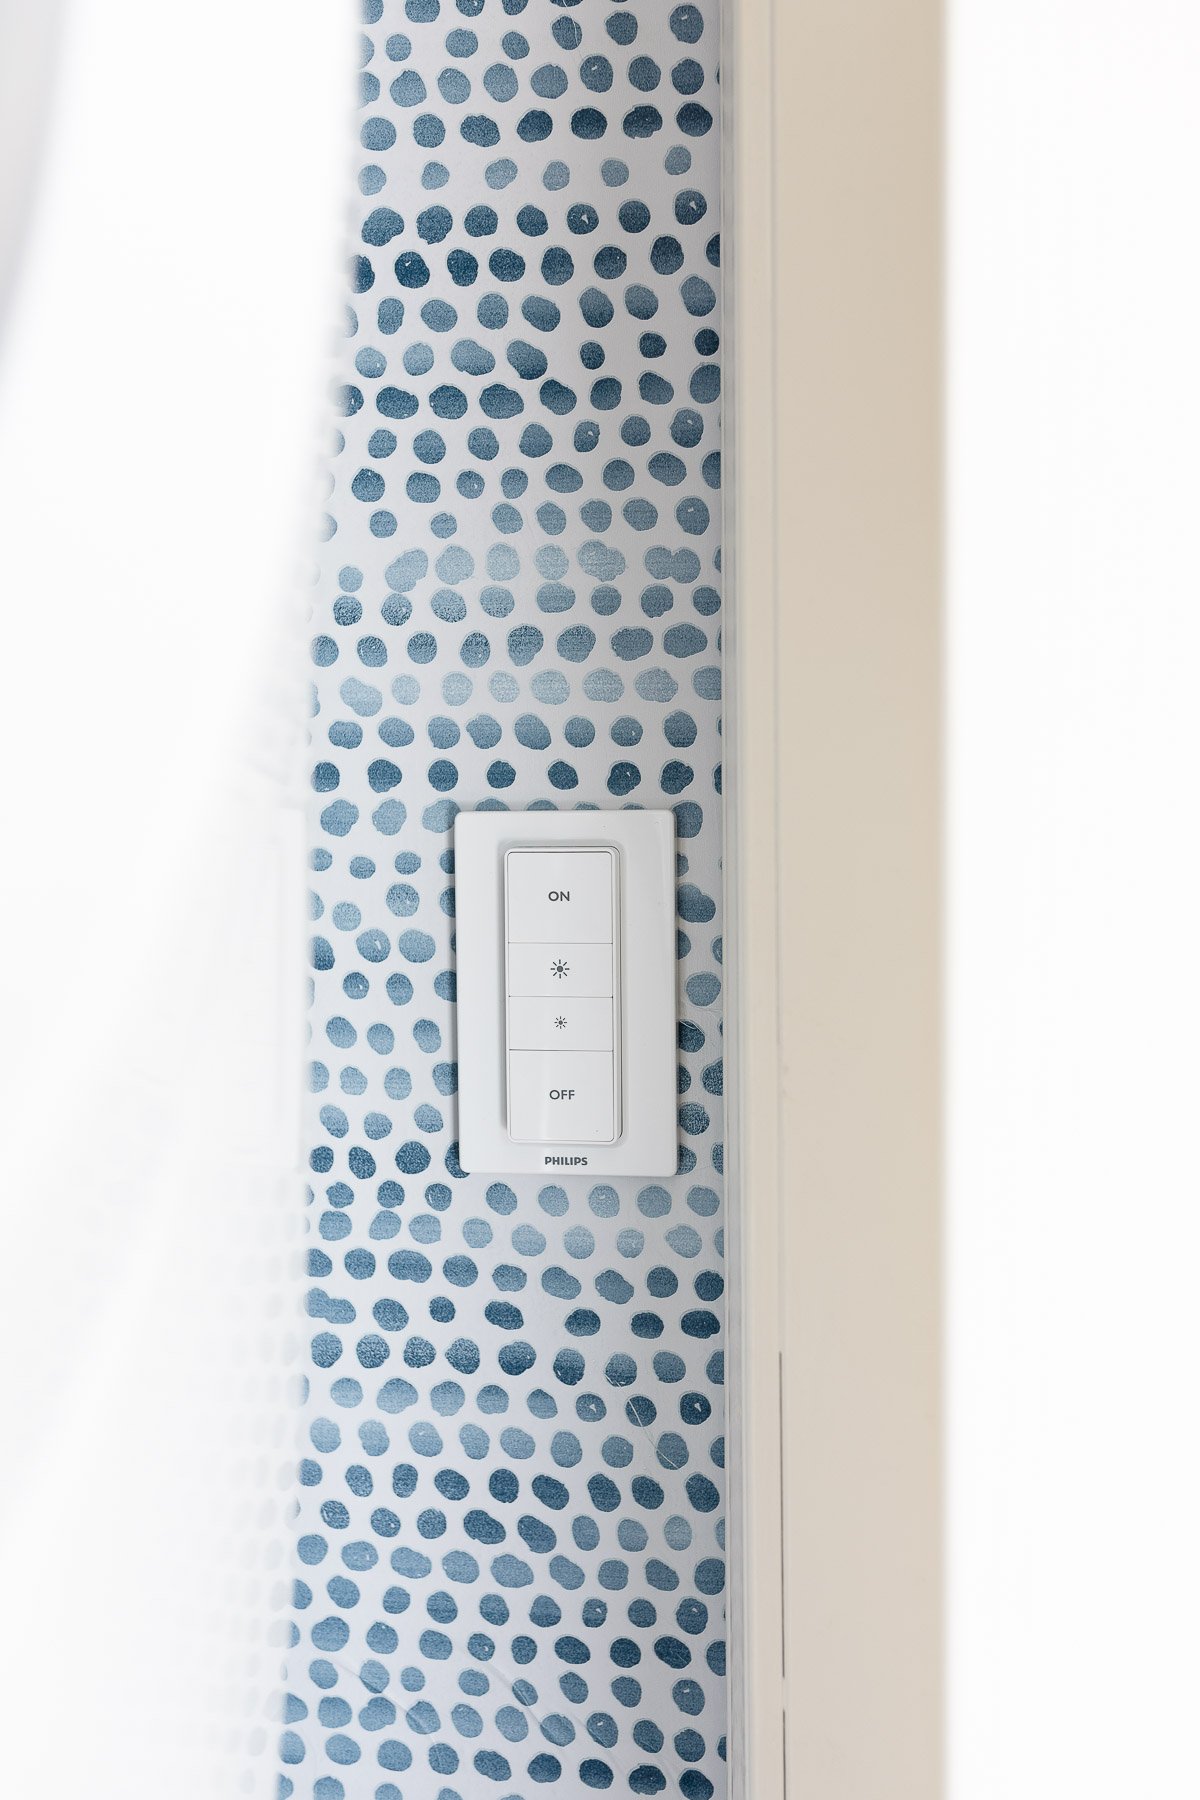 A light switch with a blue and white polka dot pattern available on Amazon.